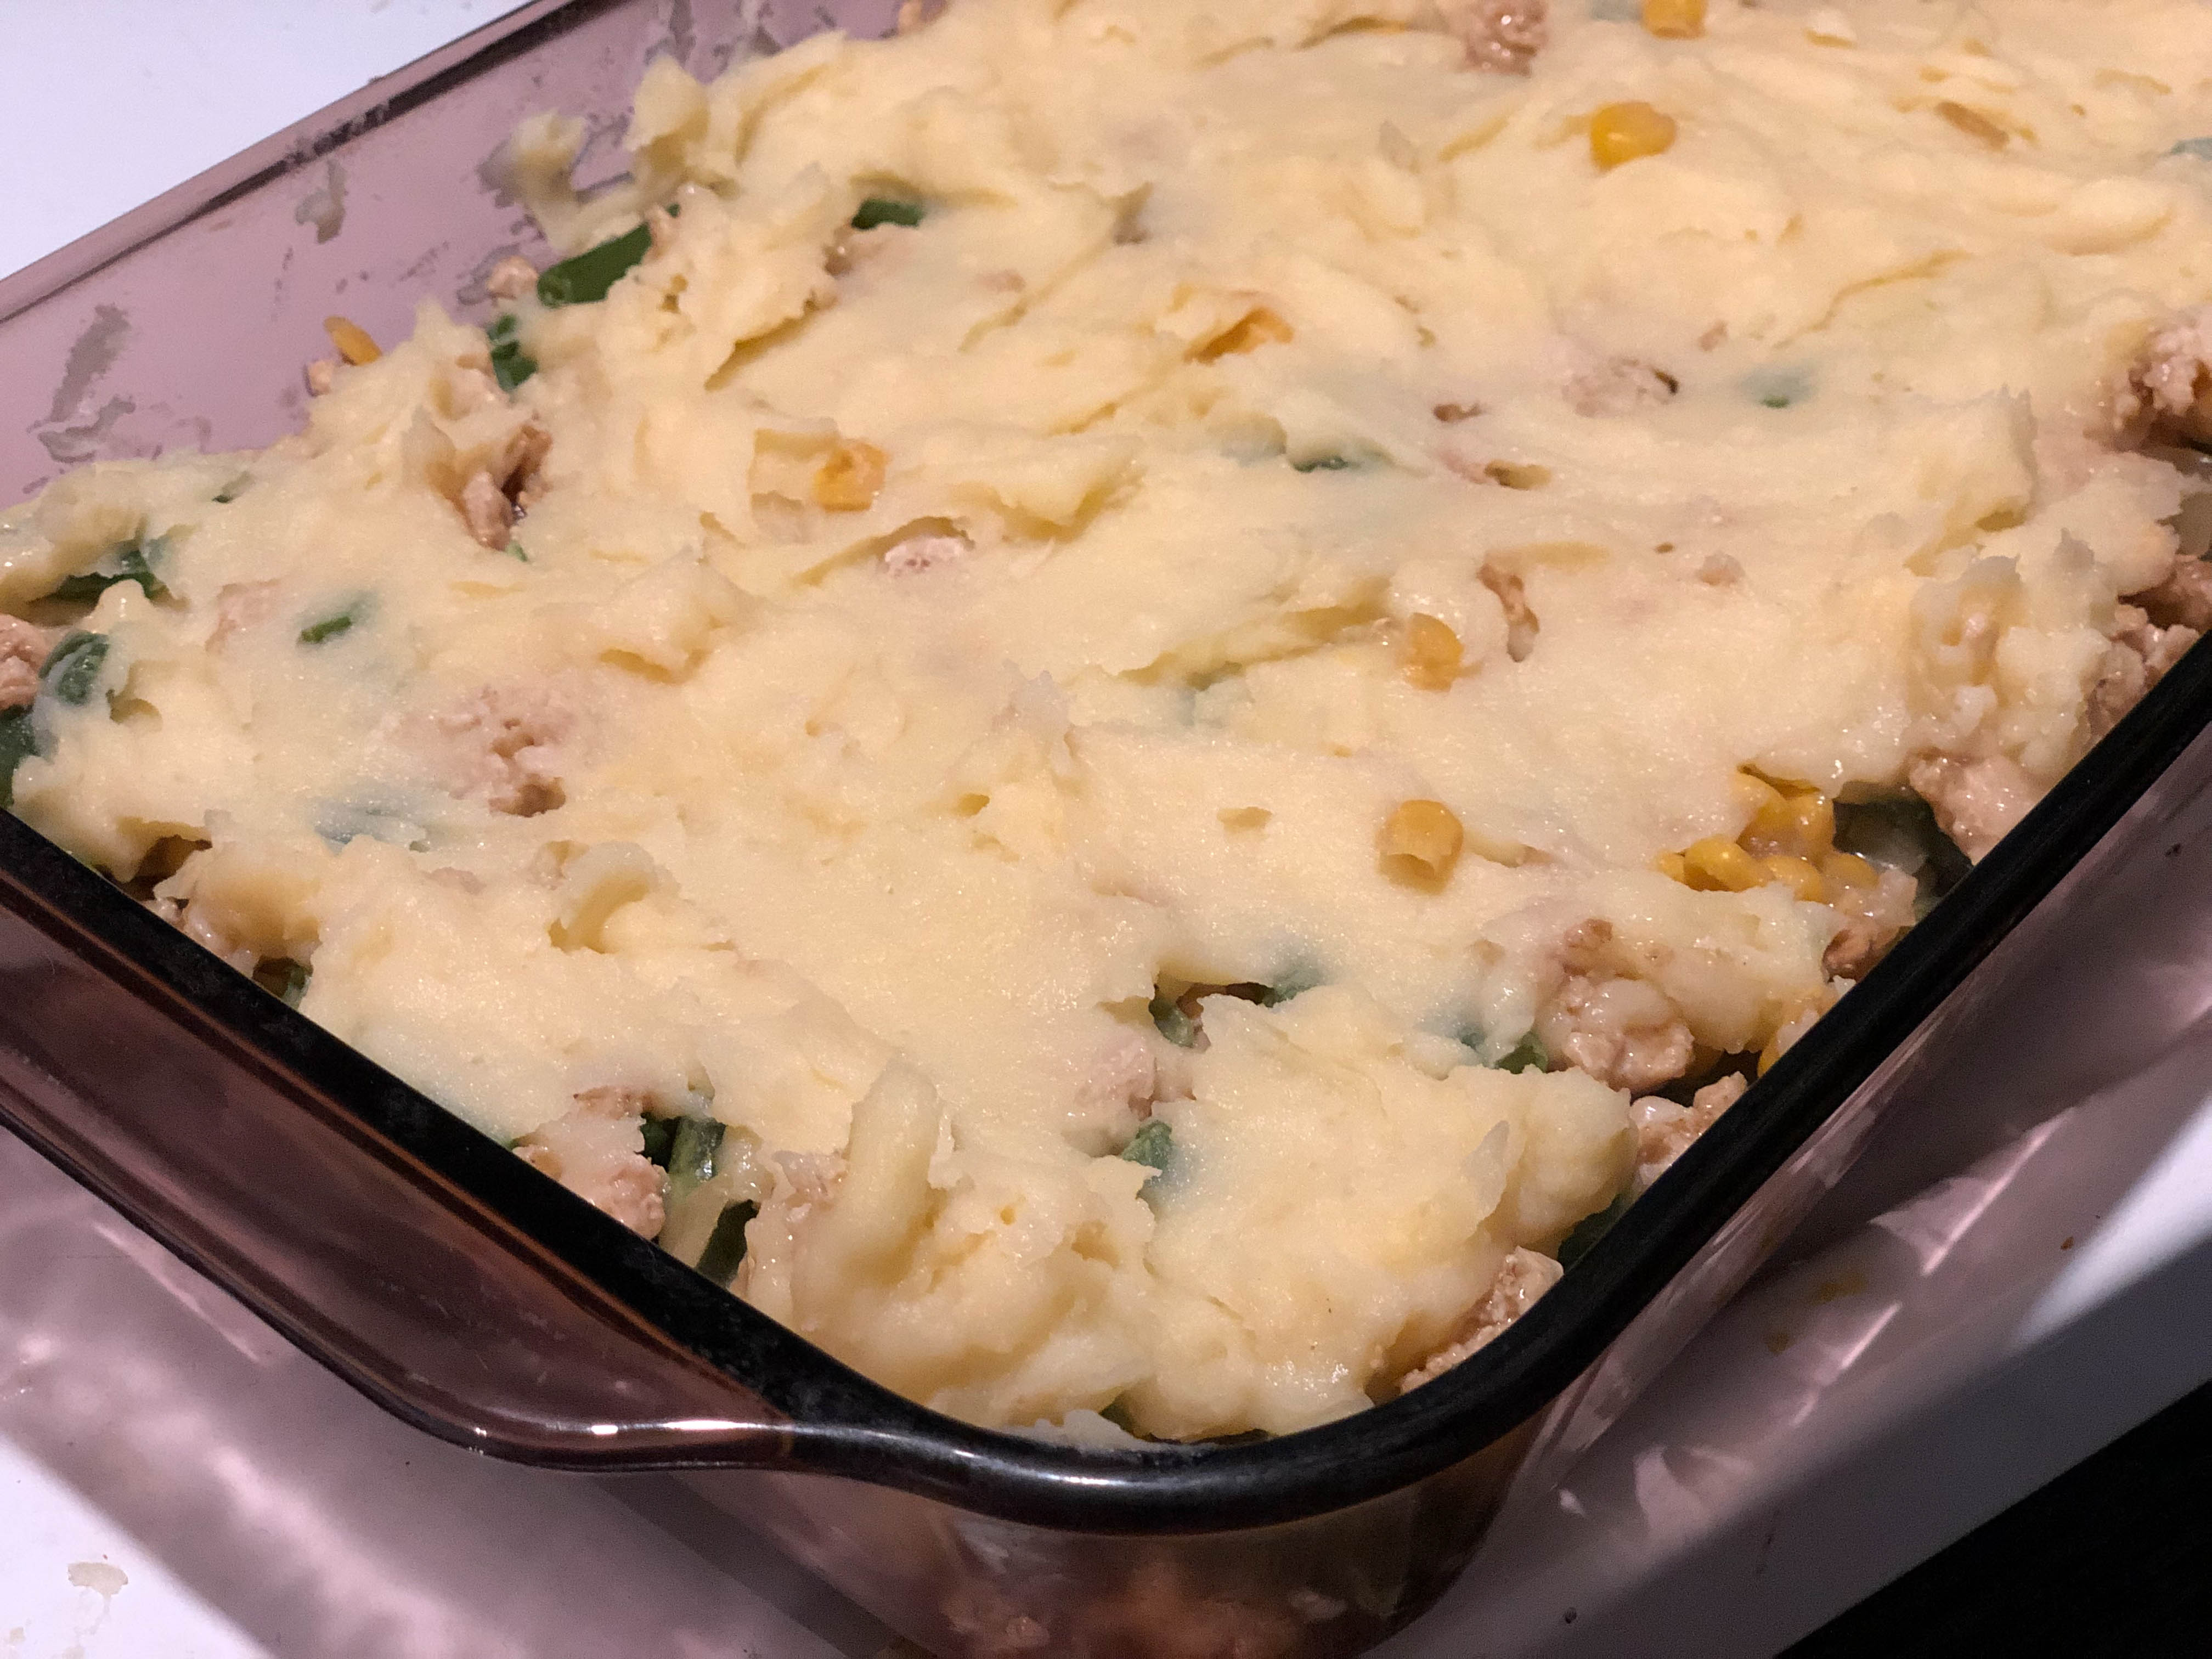 mashed potatoes on top of shepherds pie casserole